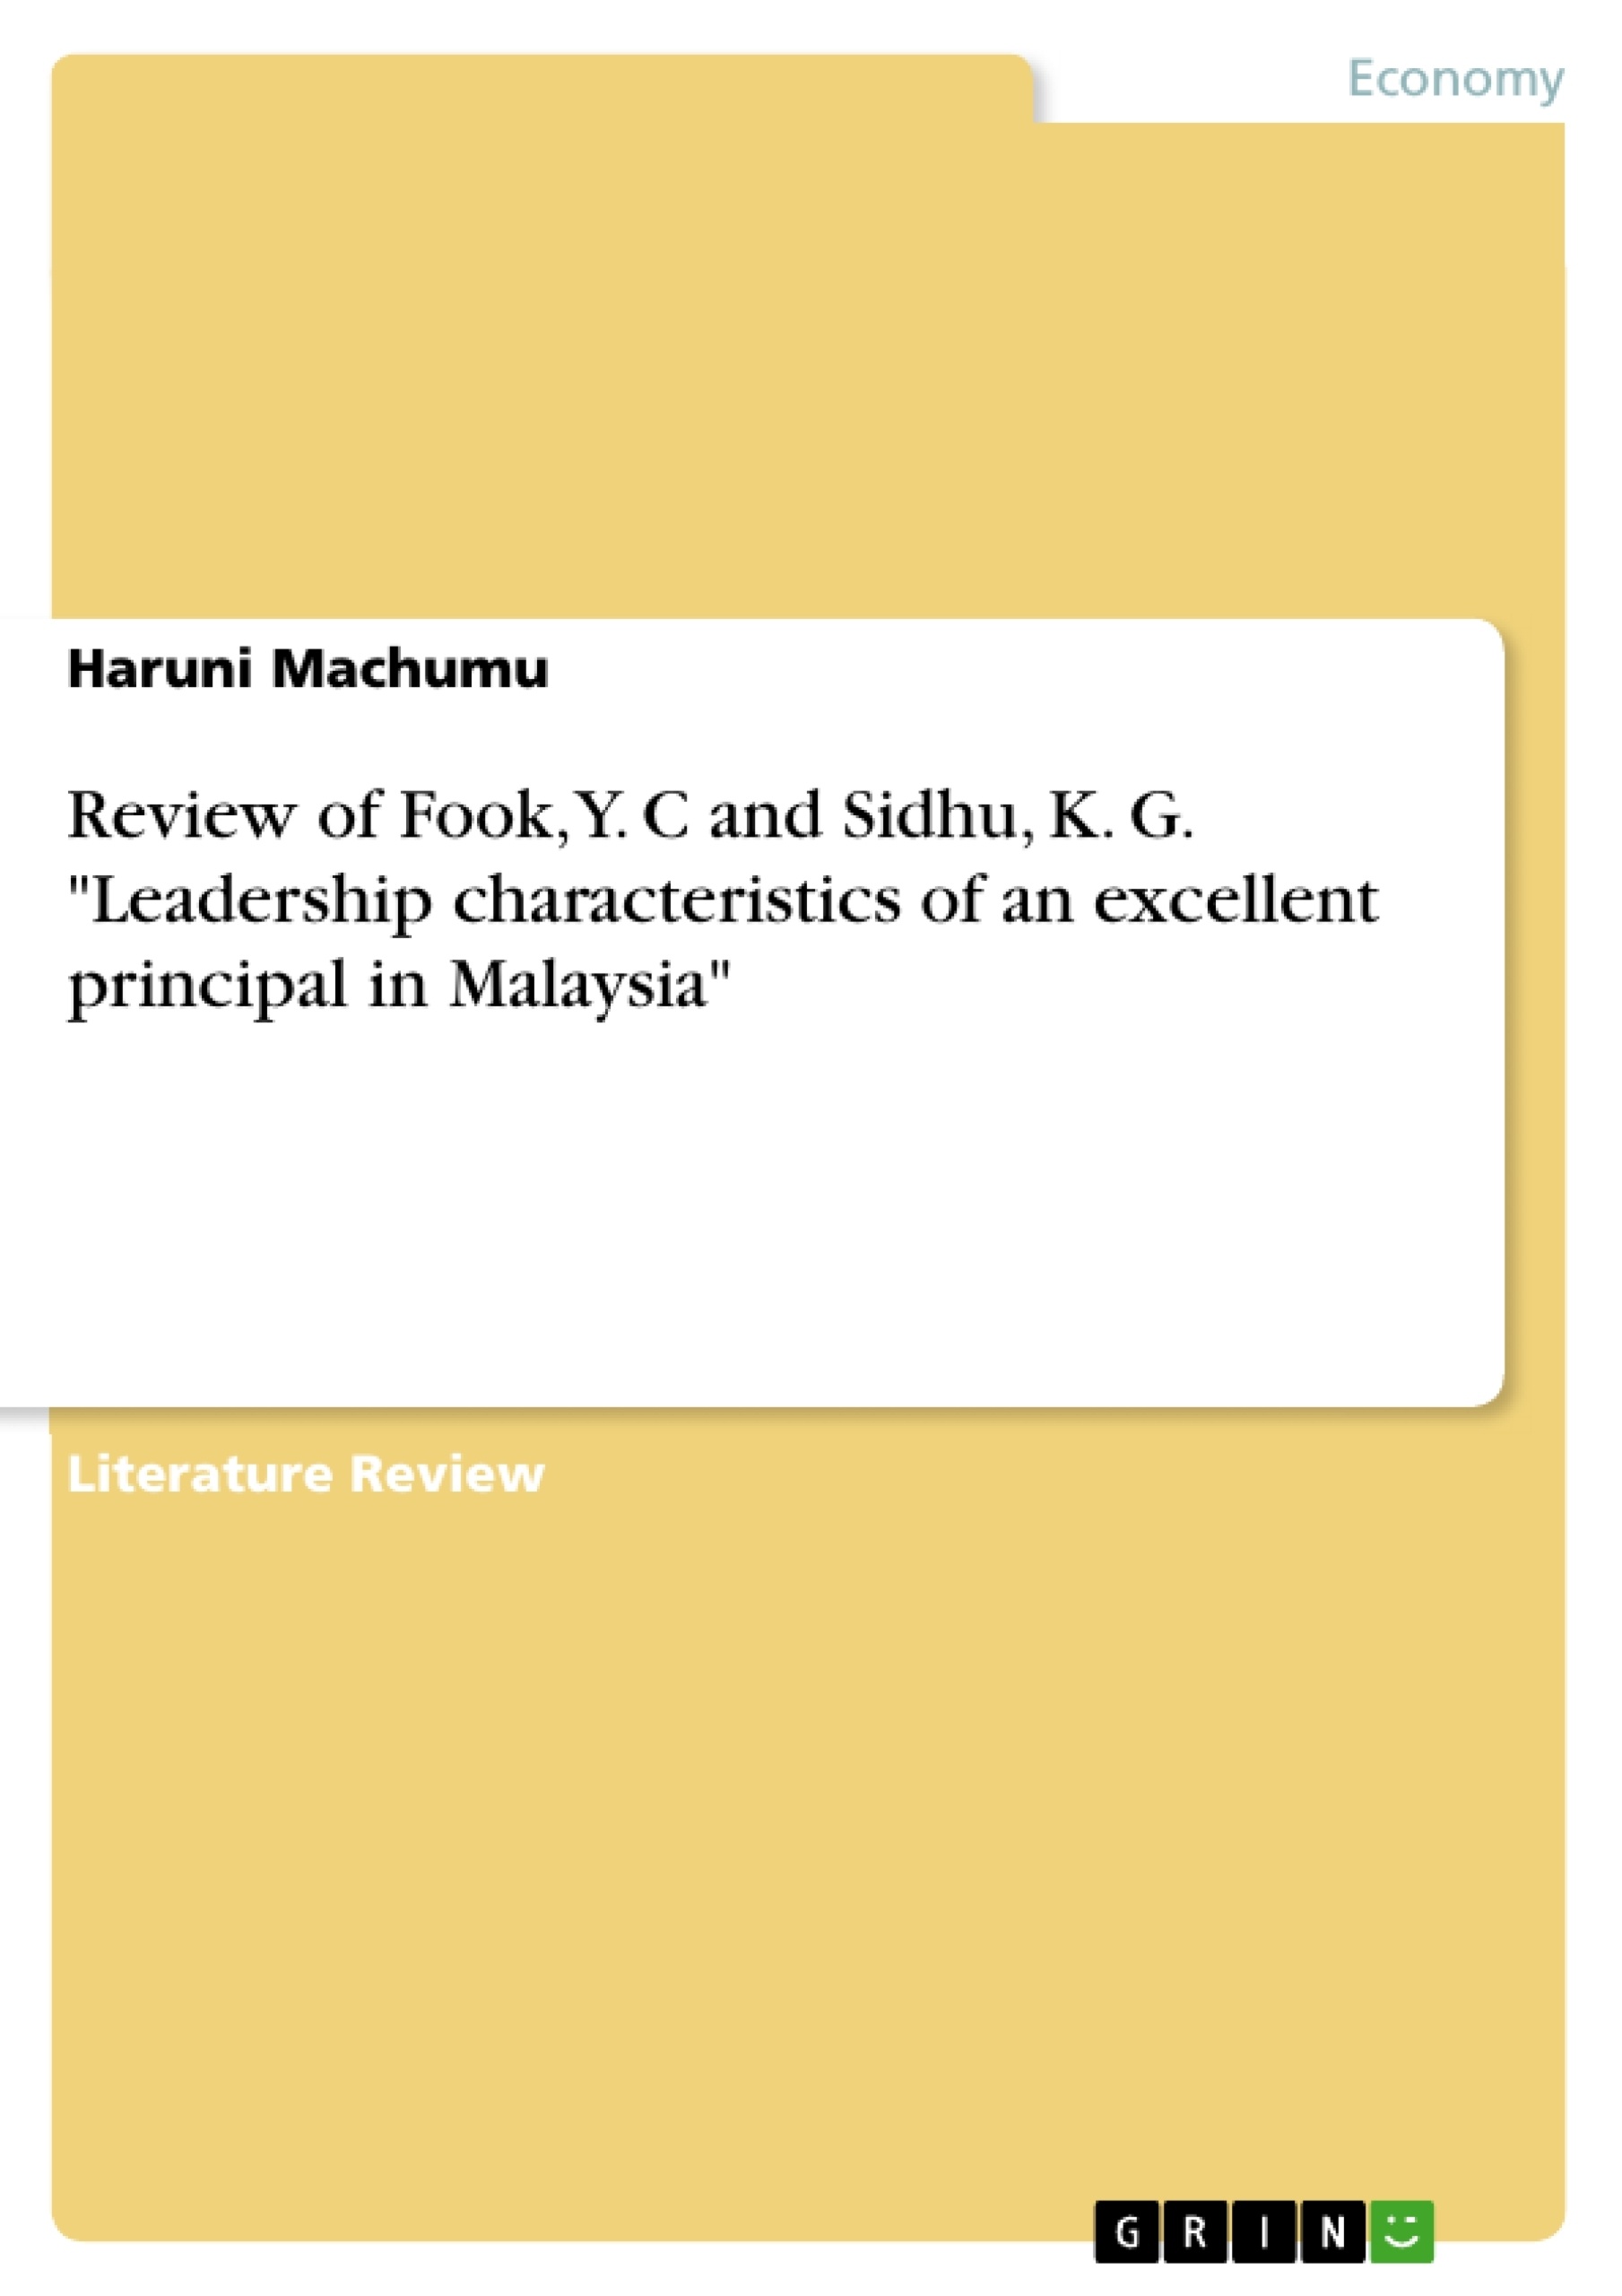 Titre: Review of Fook, Y. C and Sidhu, K. G. "Leadership characteristics of an excellent principal in  Malaysia"